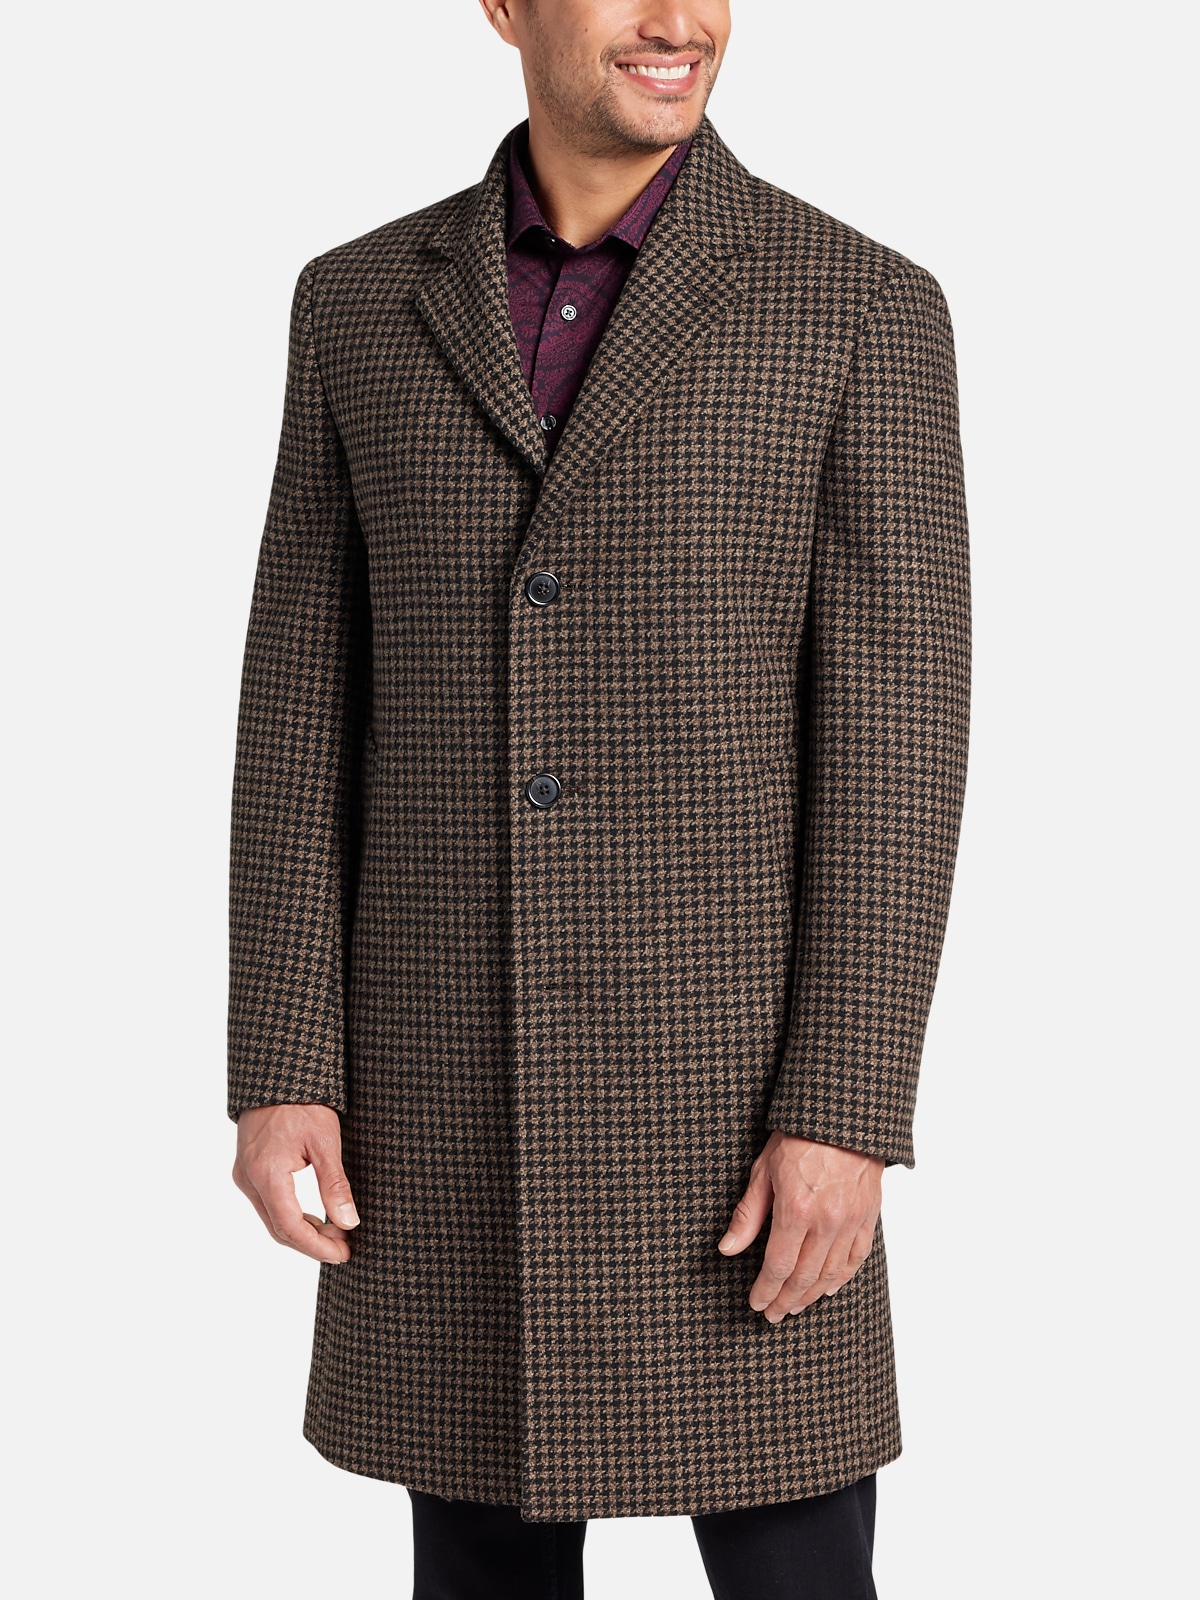 Michael Kors Classic Fit Houndstooth Topcoat | All Clearance $39.99 ...